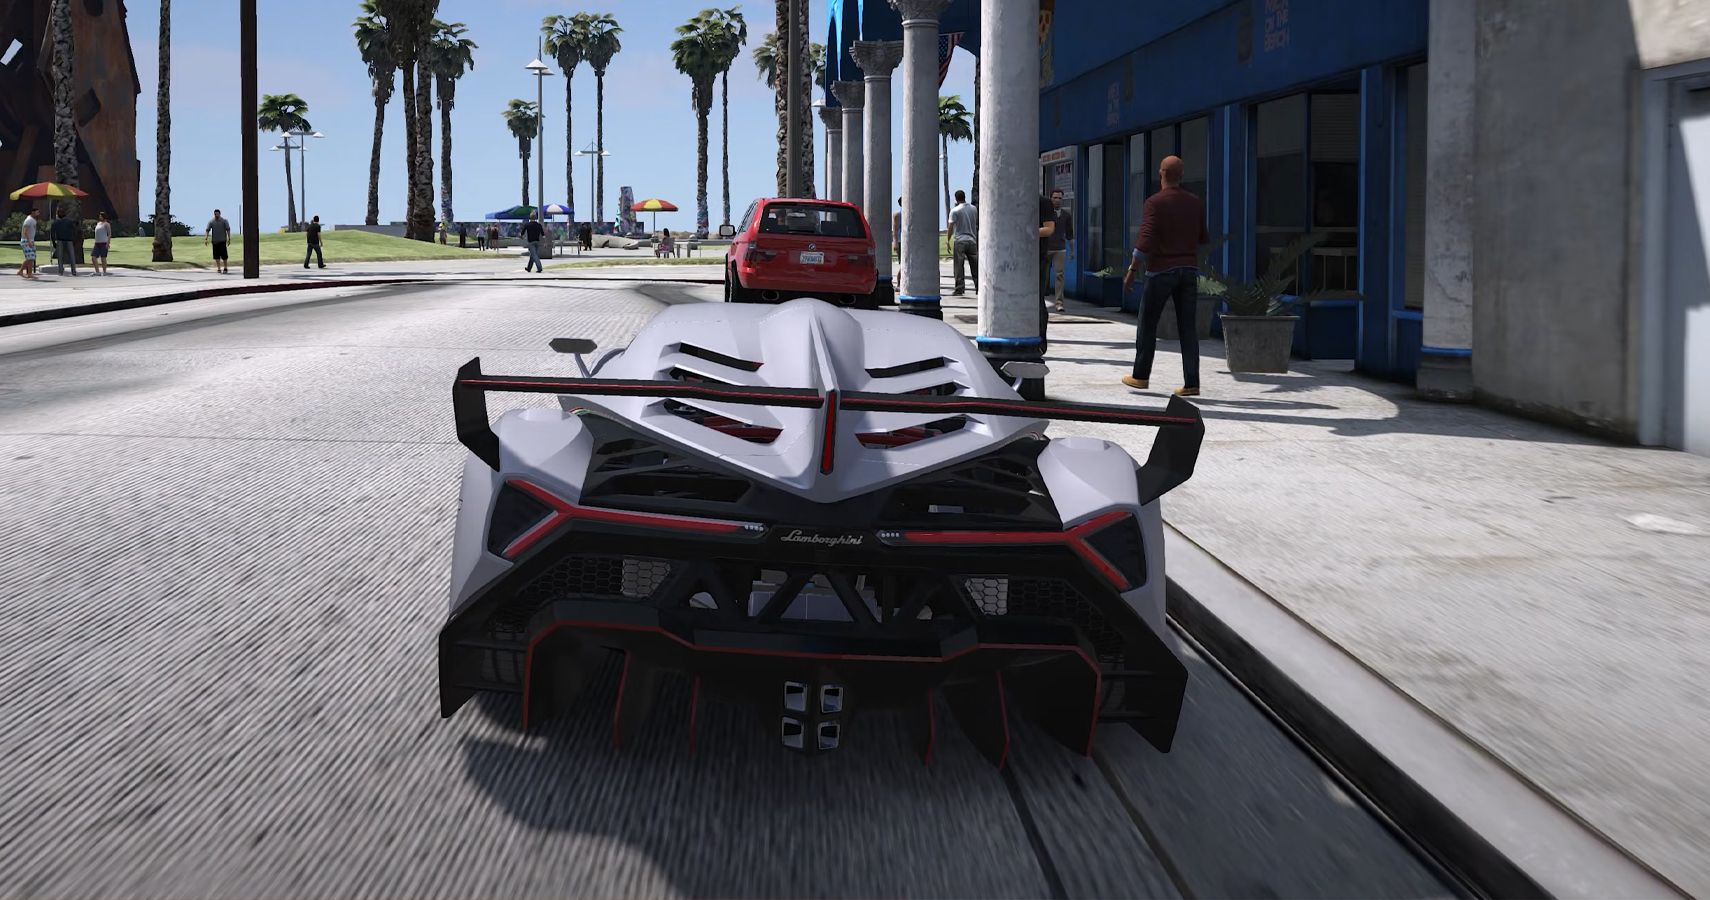 GTA 5 ray tracing mod is a glimpse of what the new-gen upgrade may look  like